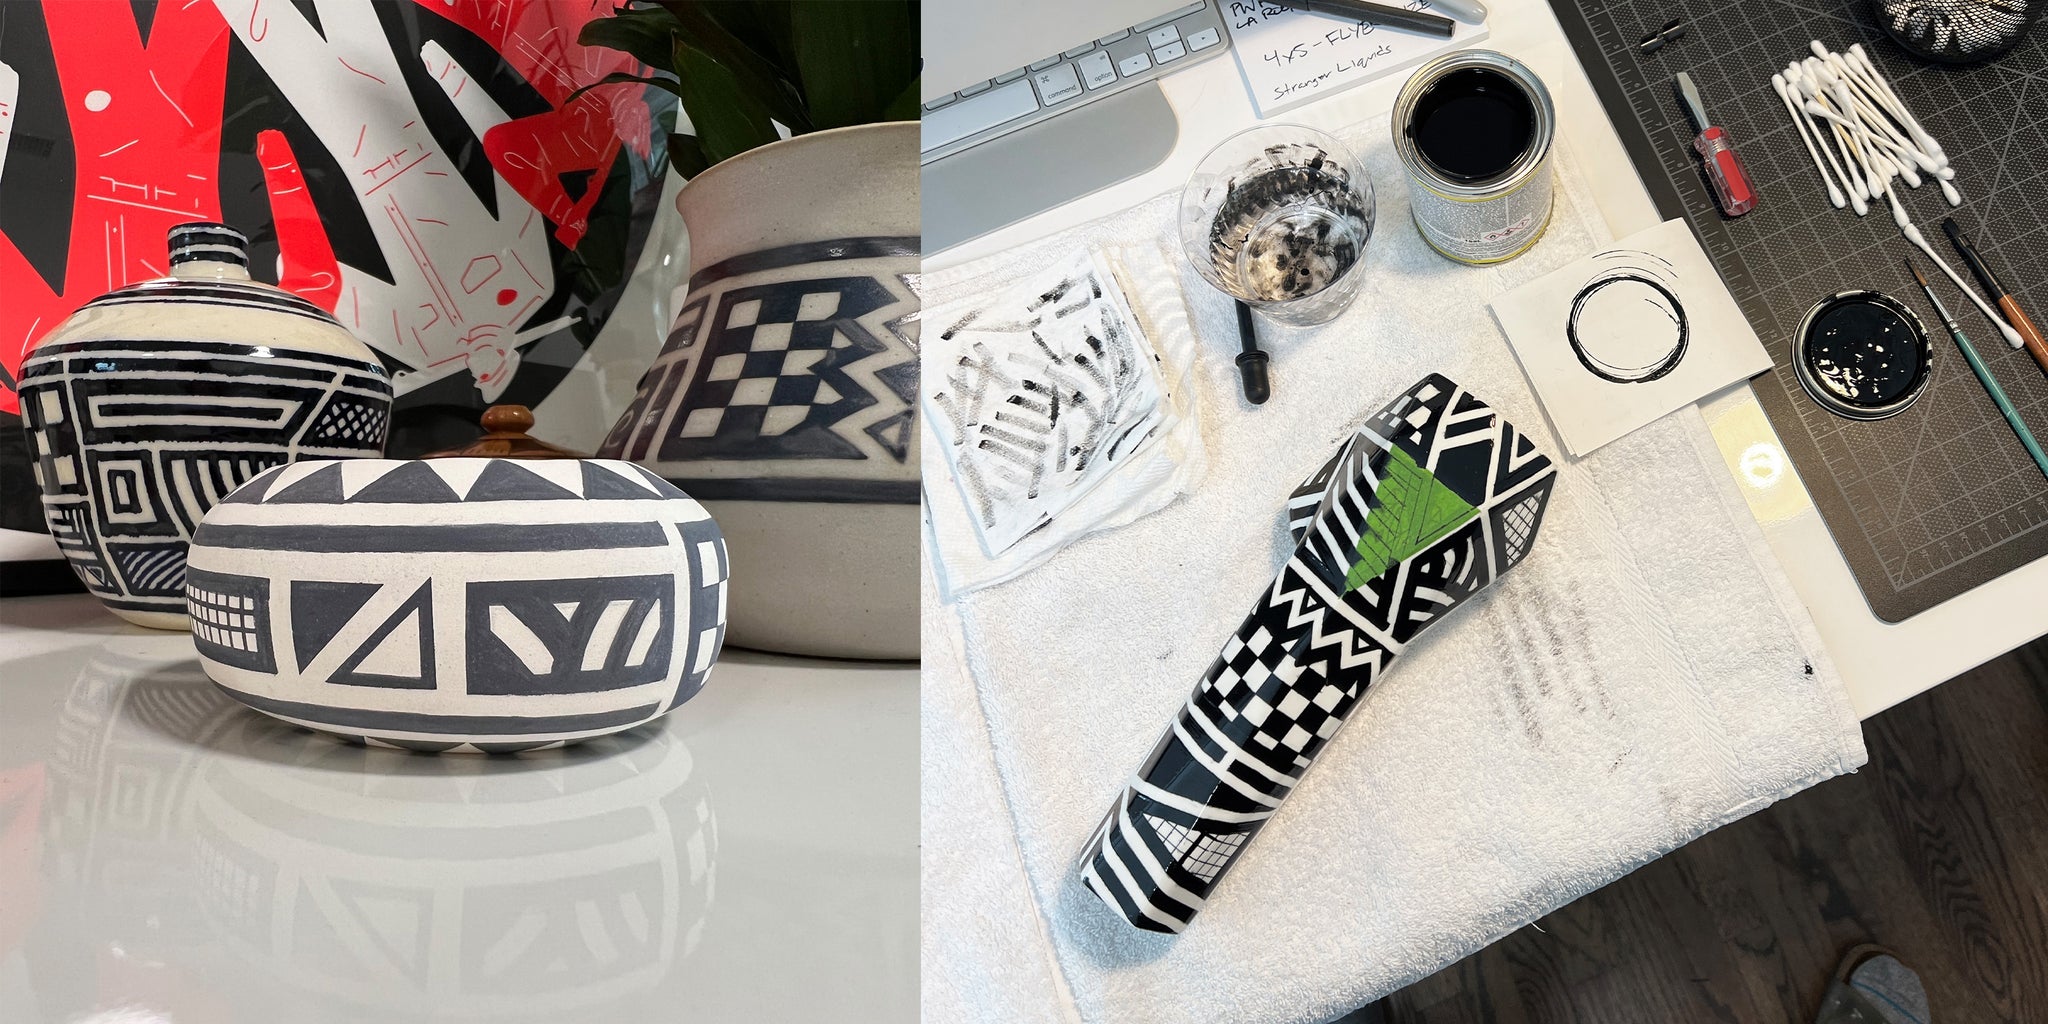 Left Image: Round ceramic bowl with bold black geometric patterning painted on. Right Image: BRNT Designs Ceramic White Hexagon being painted, the photo is a first person perspective view onto a desk. Art work by Devin Agar. 